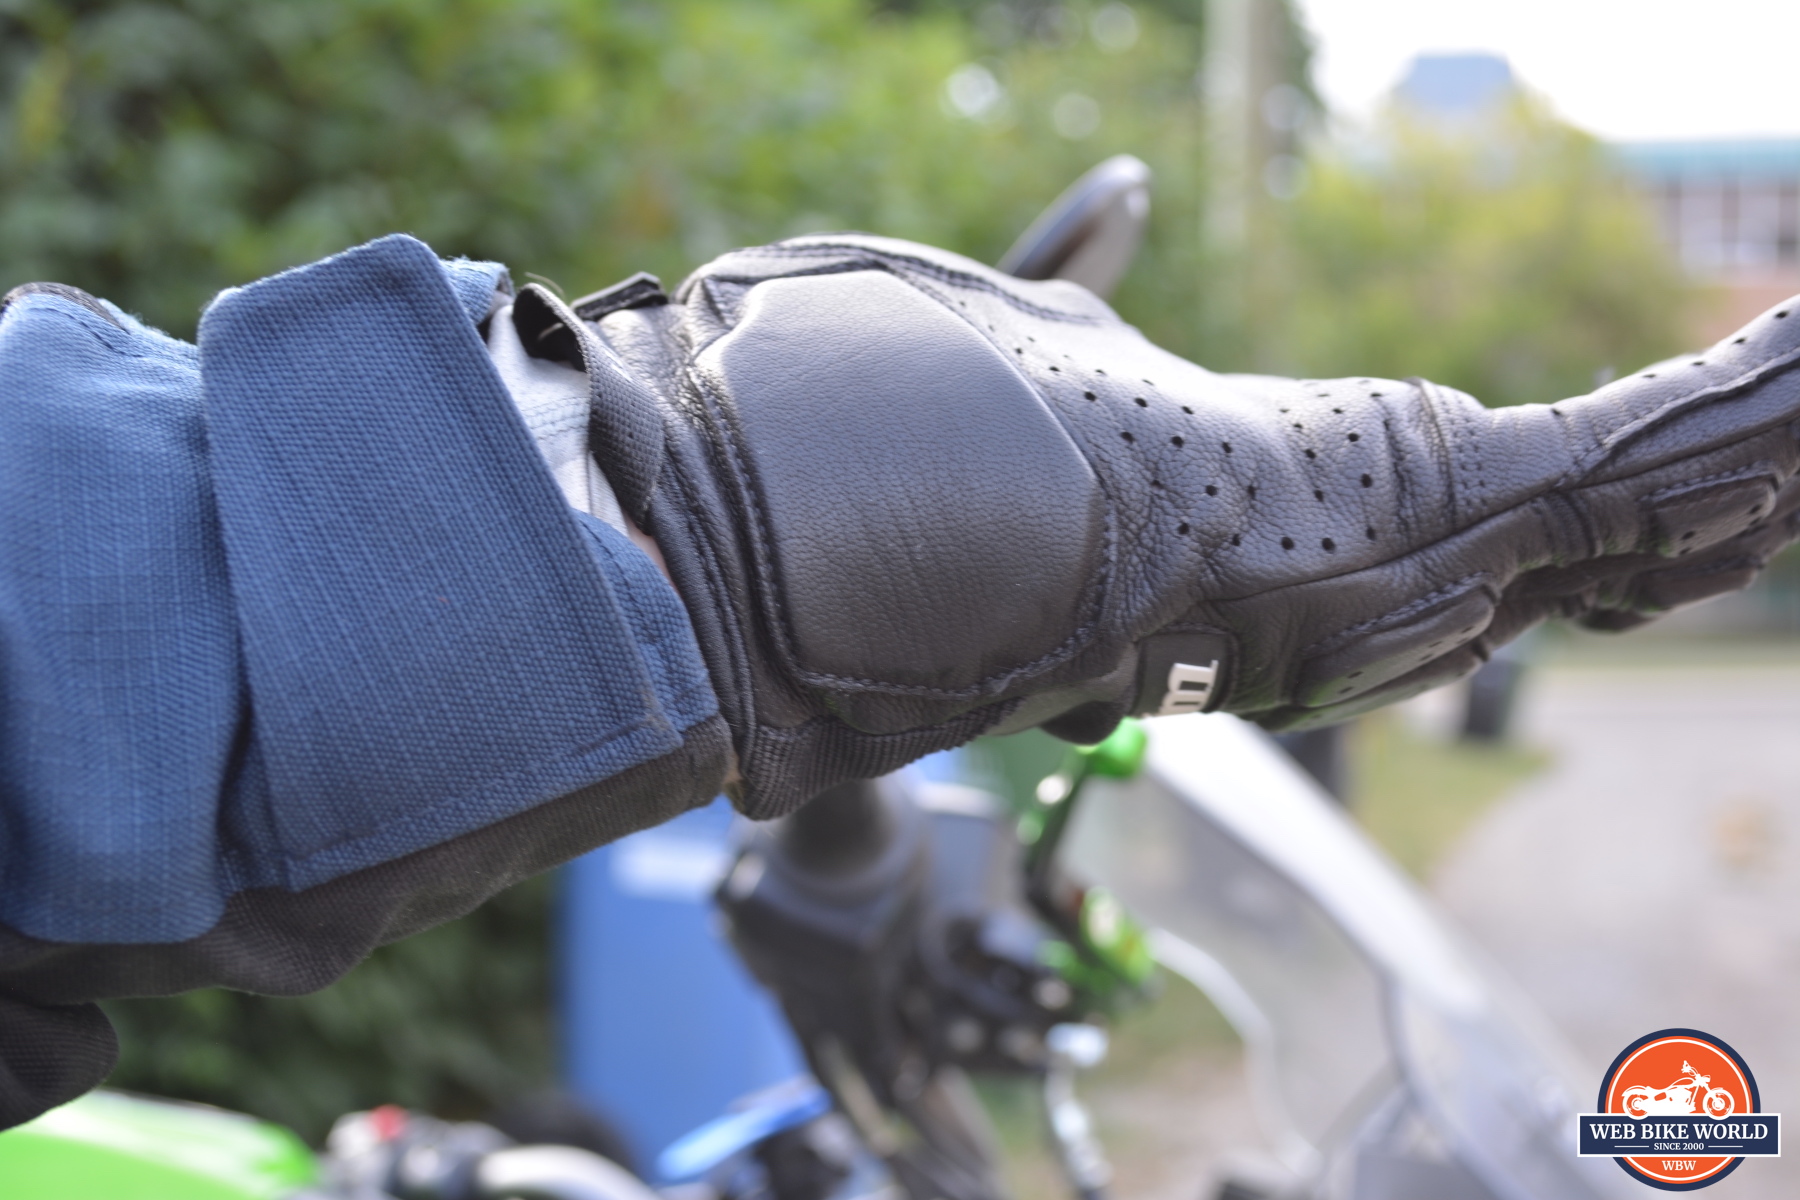 A view of the nicely sized palm pad armour with non-Newtonian foam on the KLIM Dakar Pro Gloves.